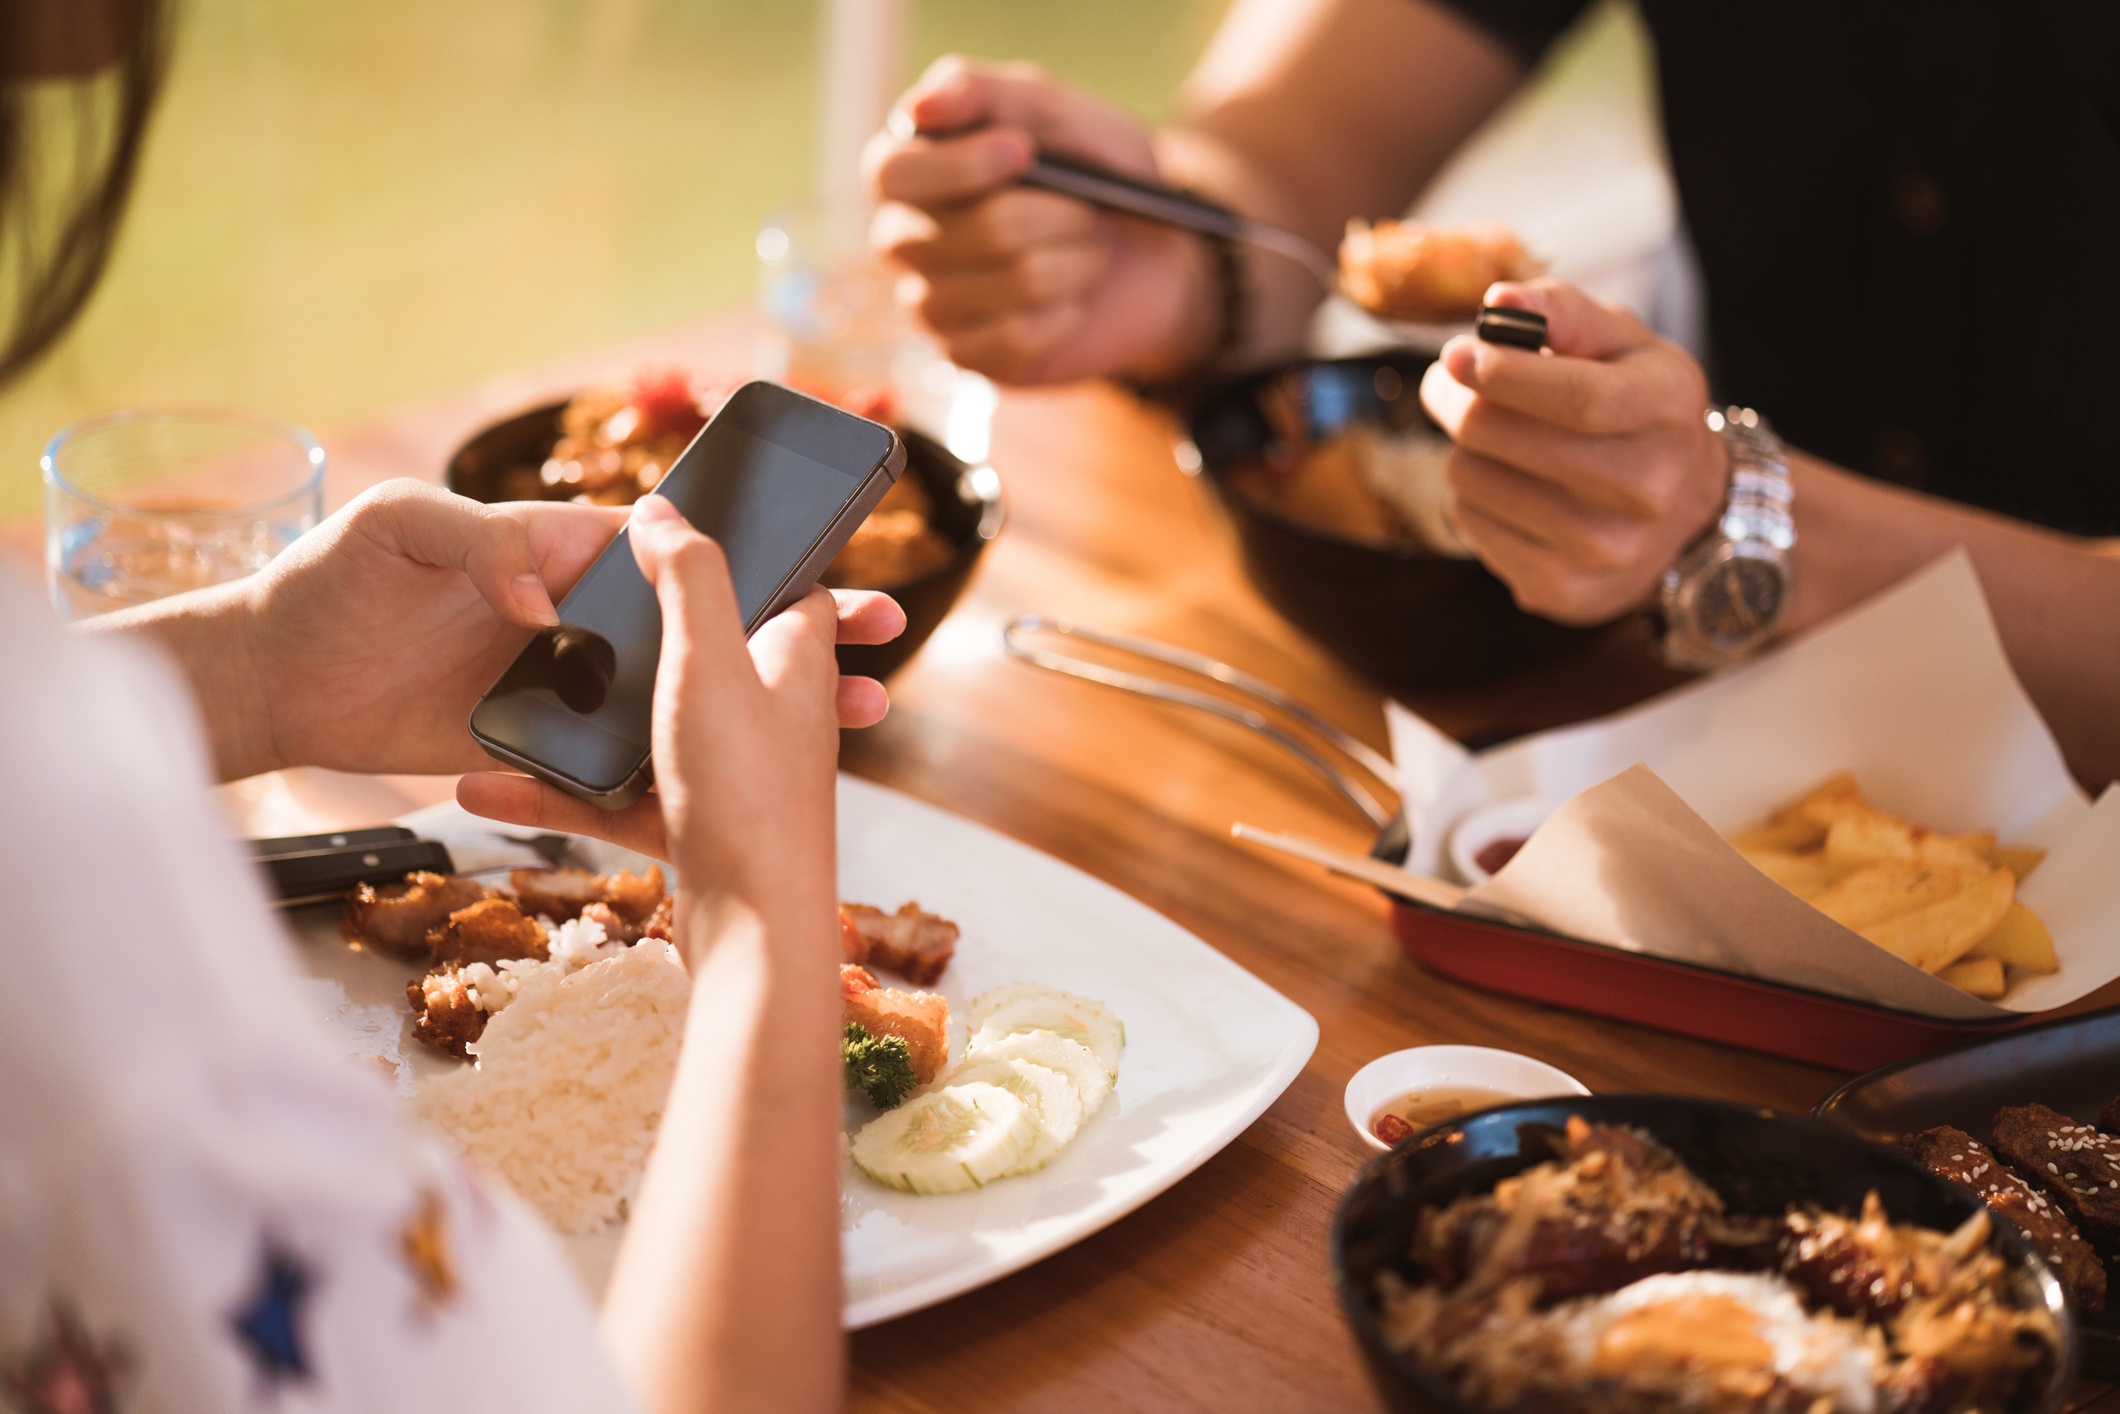 A woman browsing her phone while having a meal with his partner